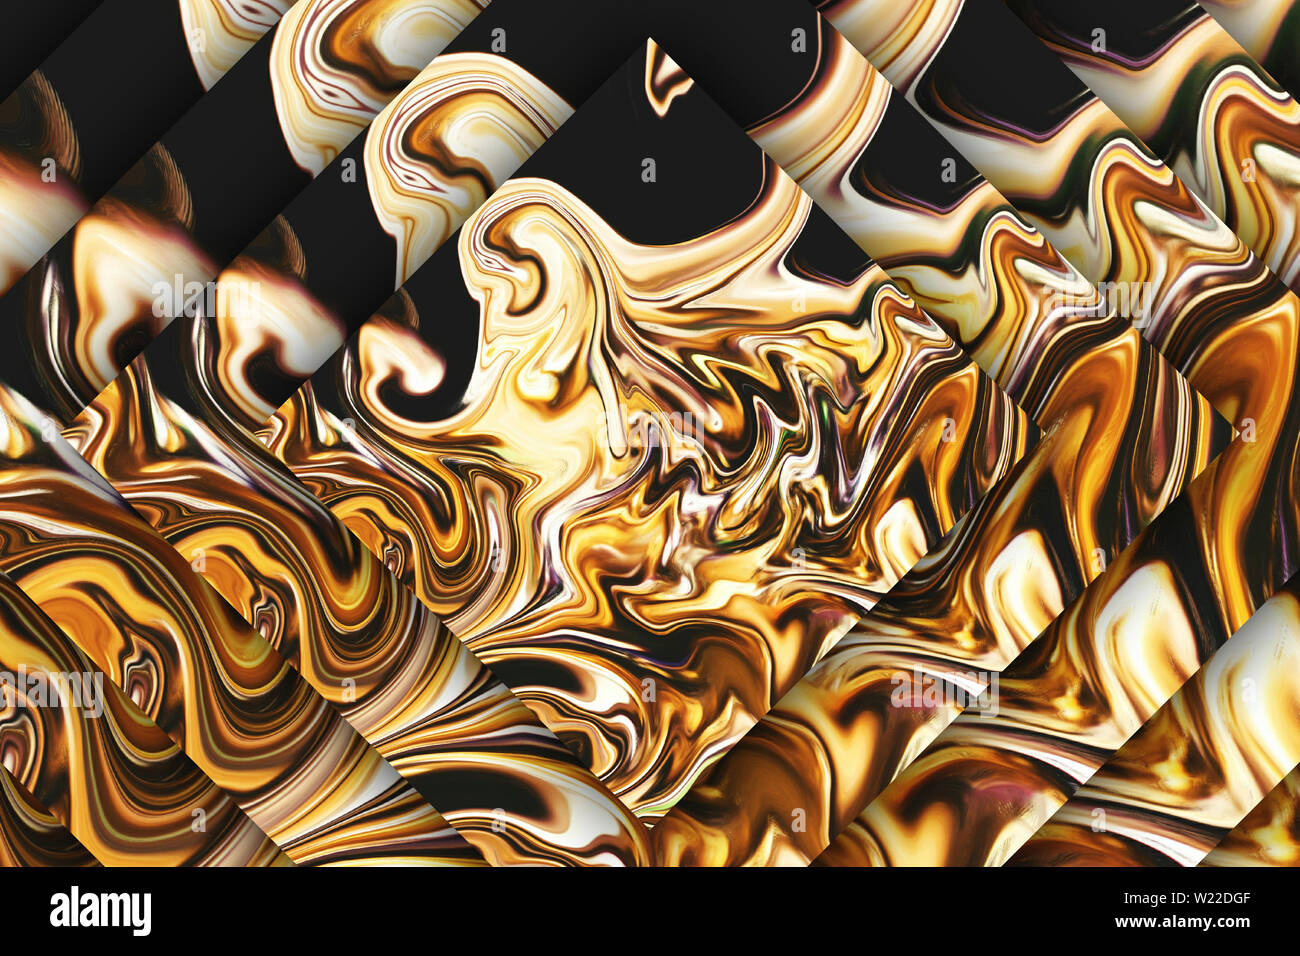 Liquid gold effect oil painting artwork. Creative luxury design. Golden colors pattern background. Stock Photo